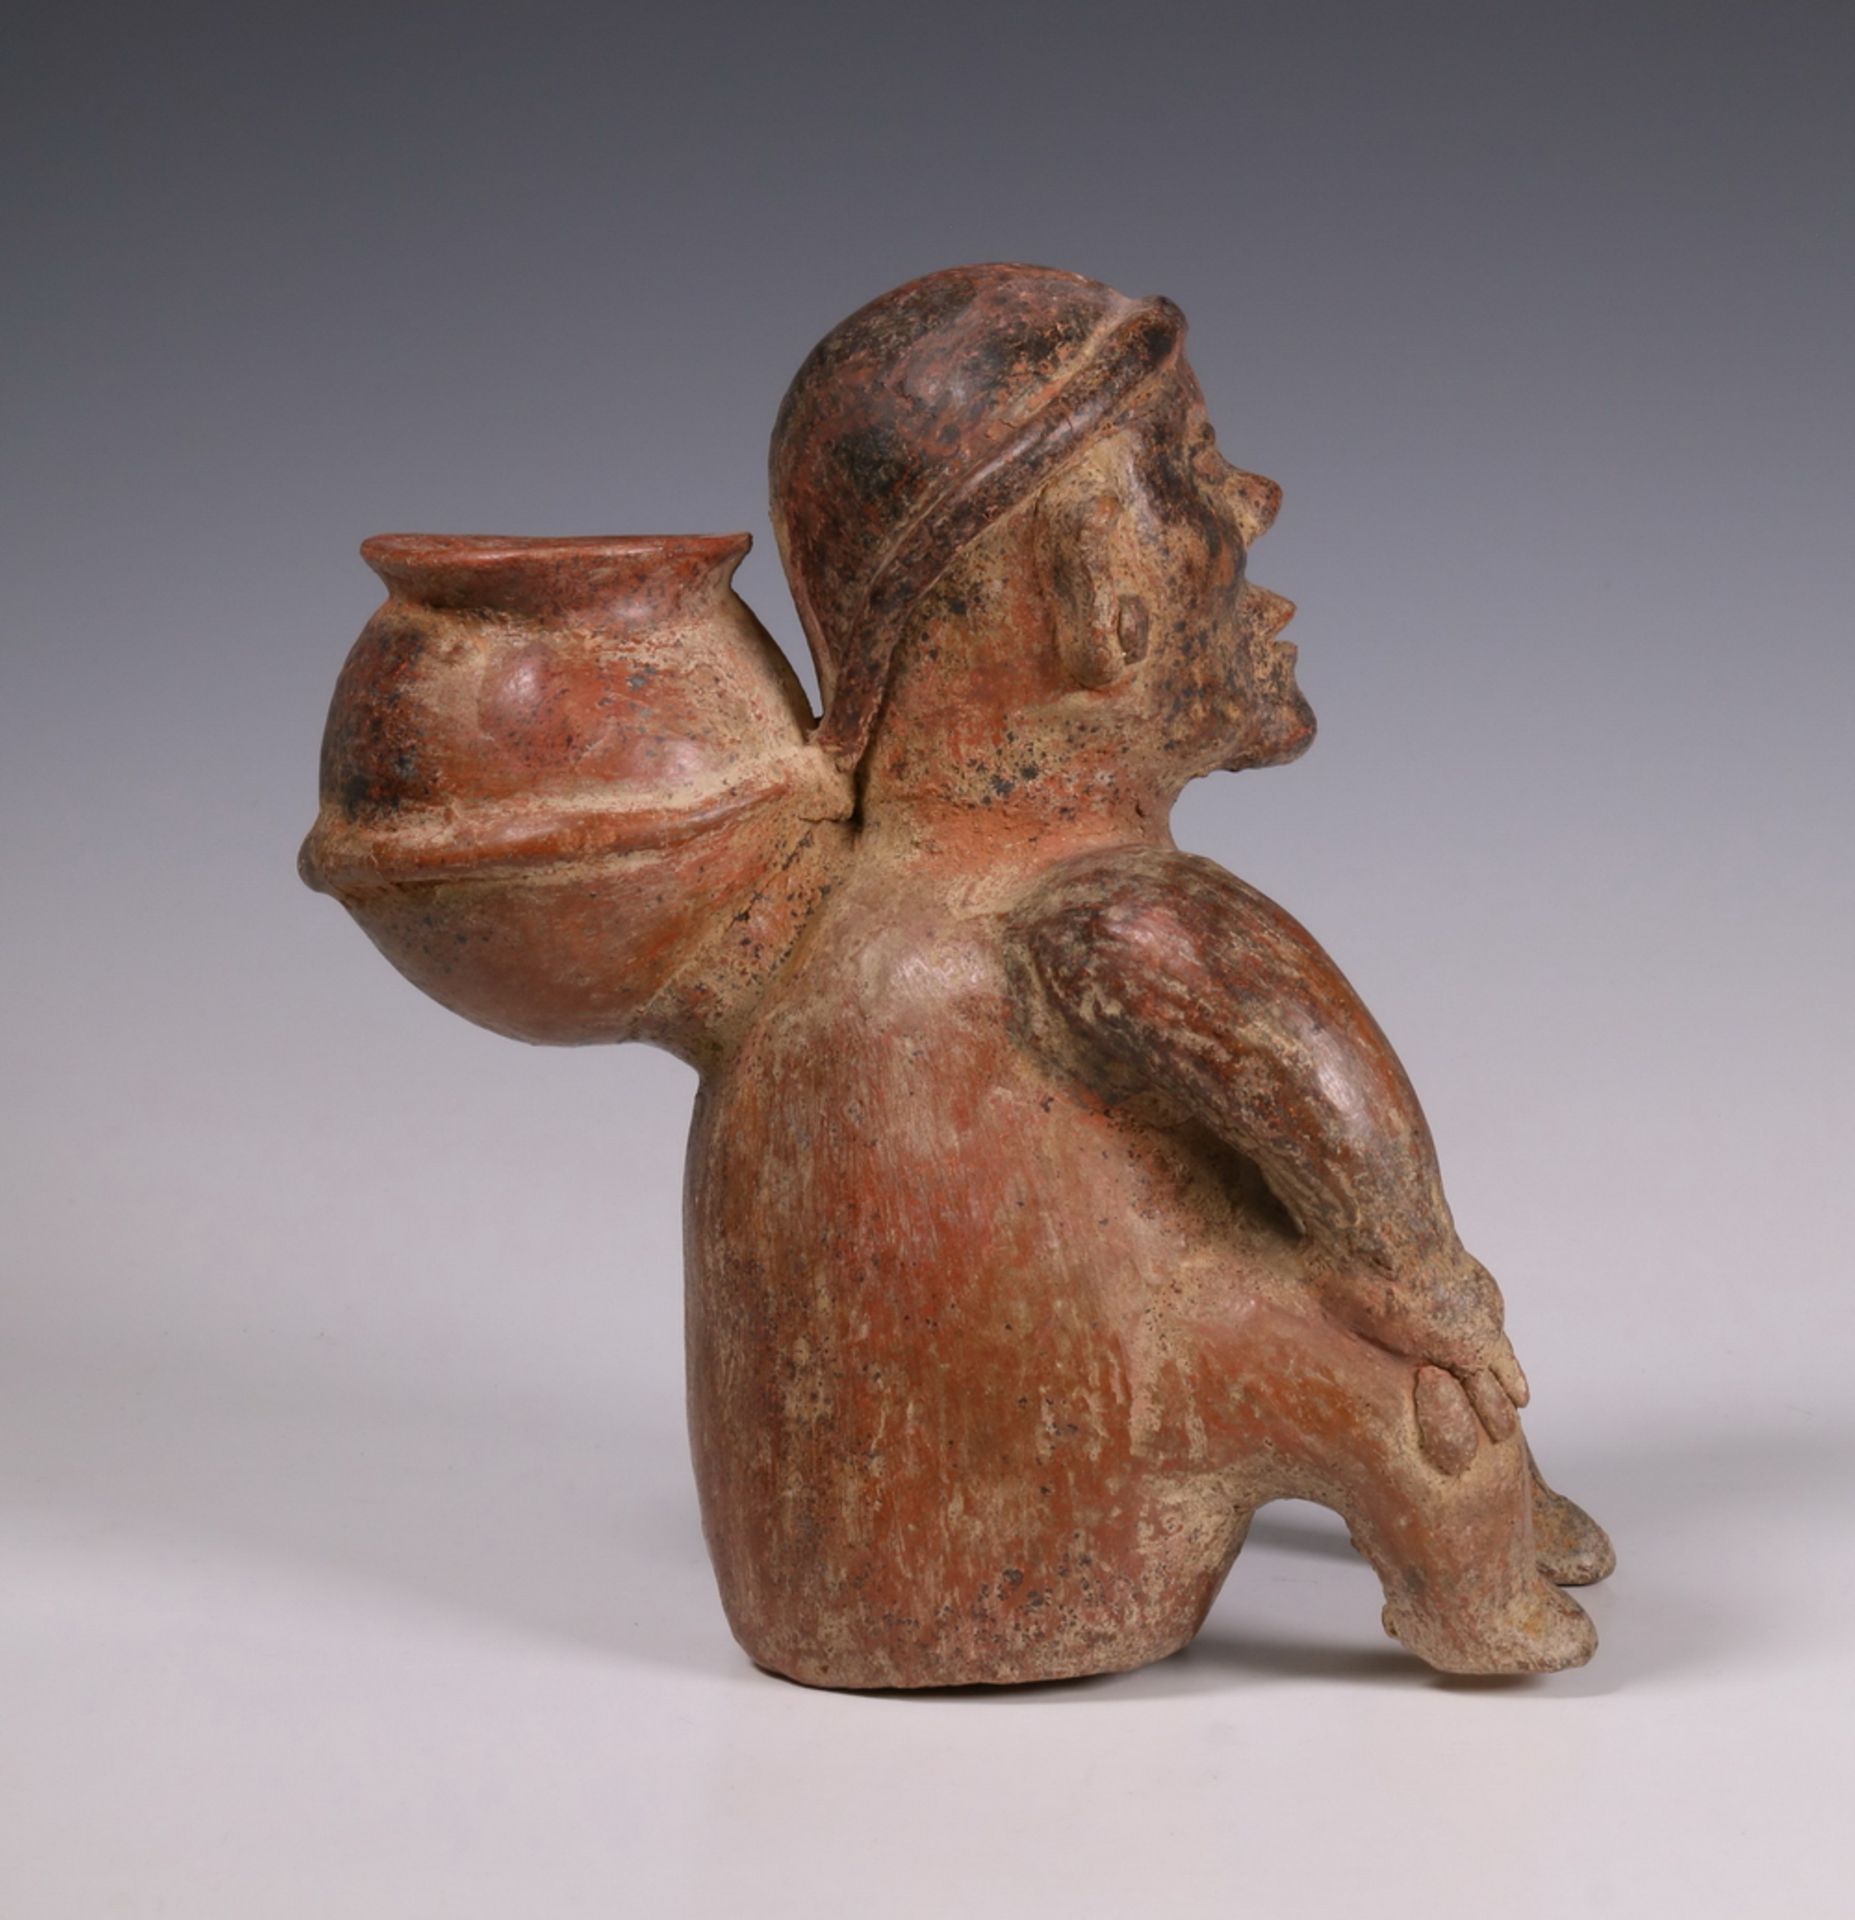 Mexico, Colima, a red earthenware sculpture of a seated figure, 100 BC-250 AD, - Image 4 of 5